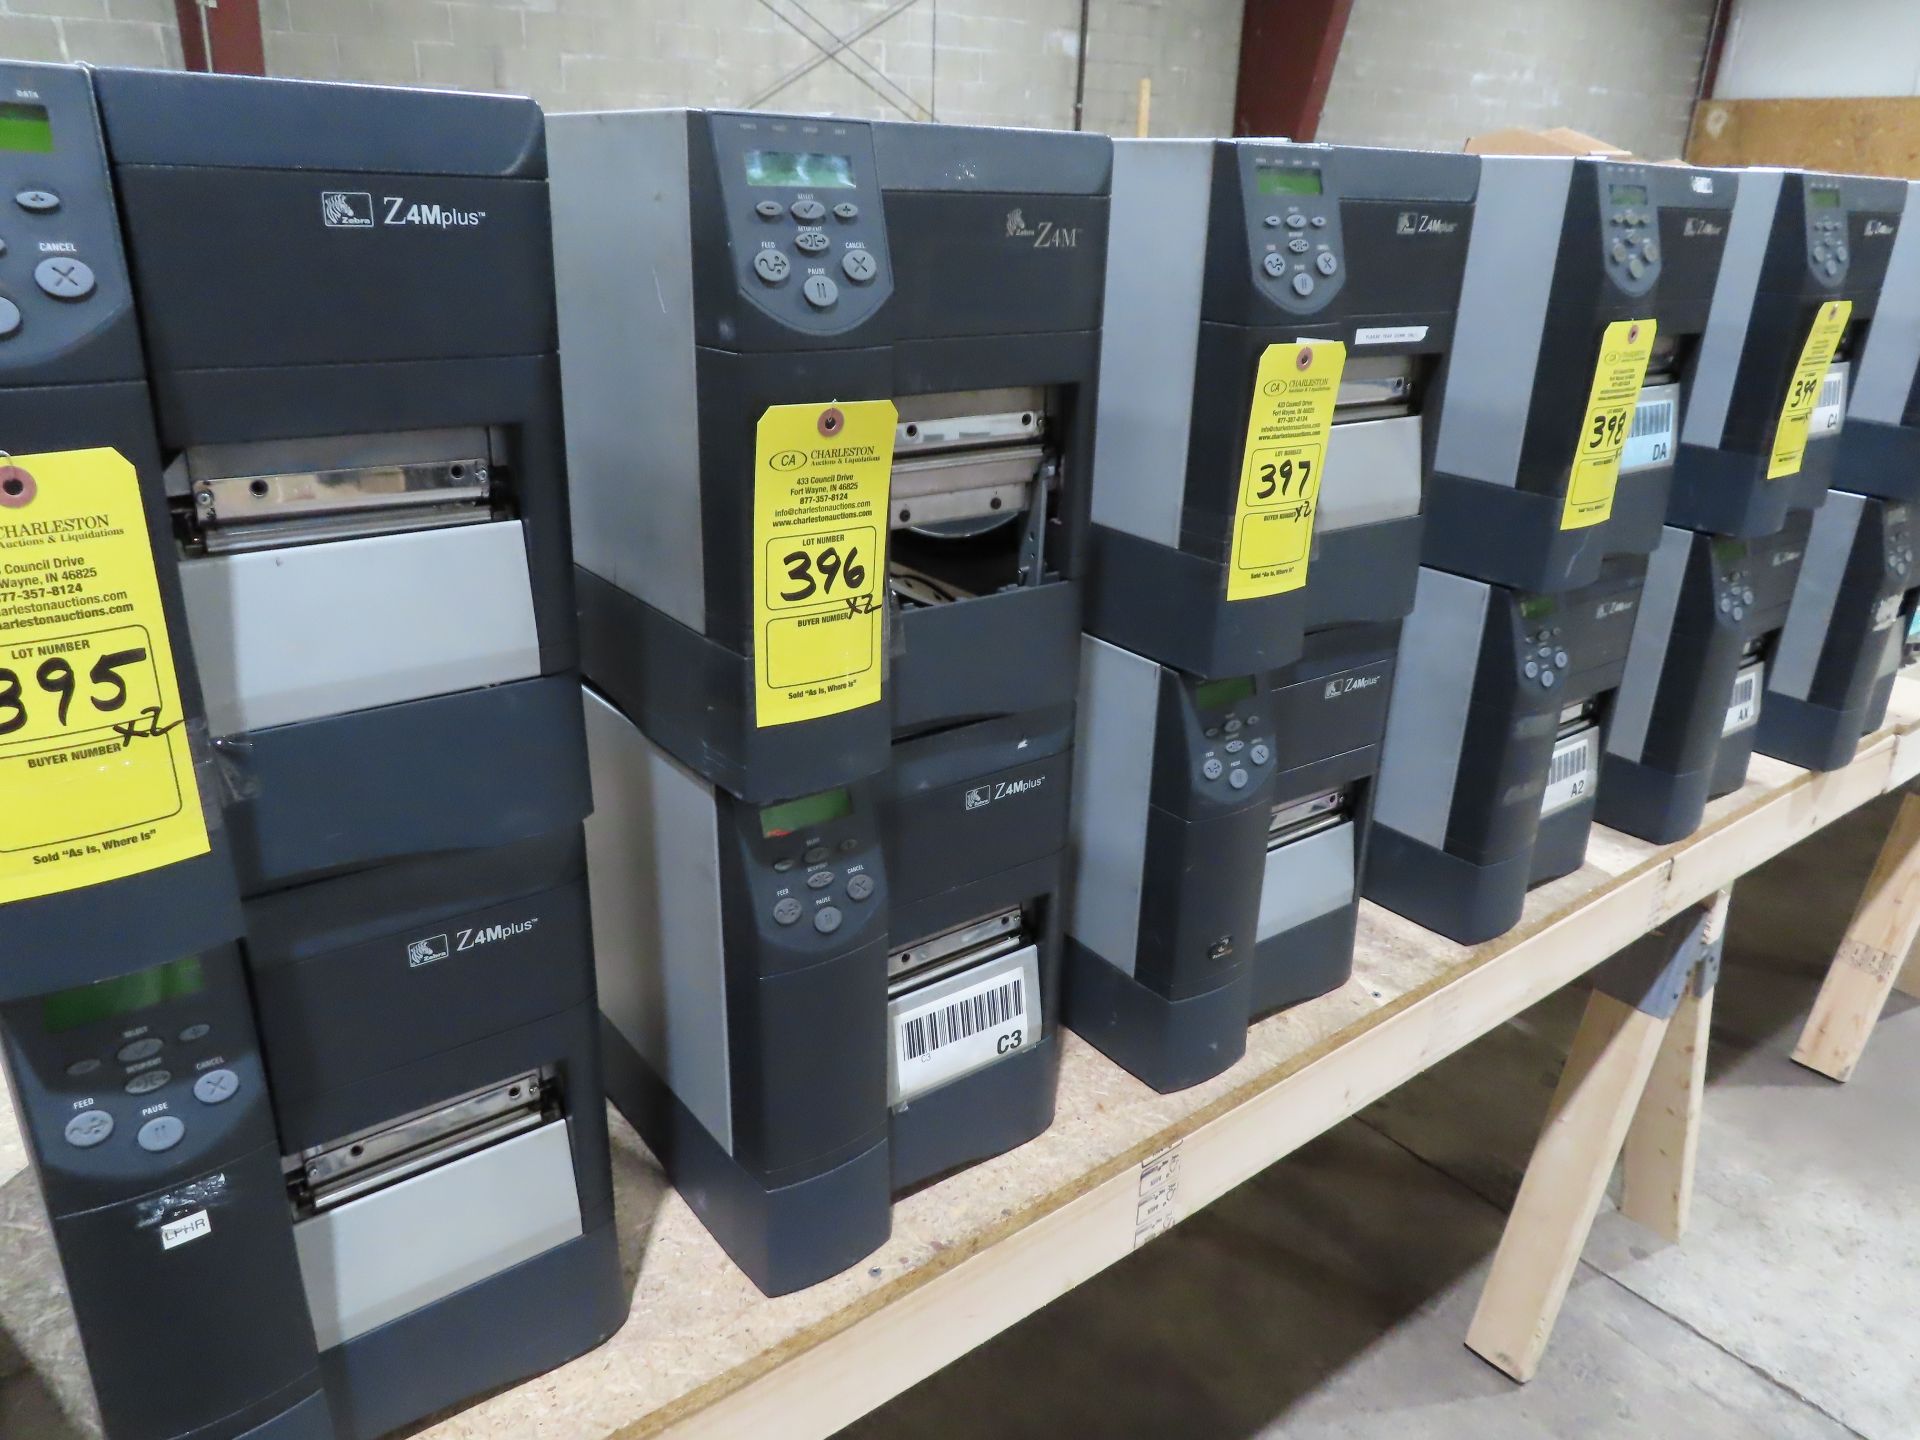 Qty 2 Zebra industrial printers, Z4M, and Z4Mplus, as always, with Brolyn LLC auctions, all lots can